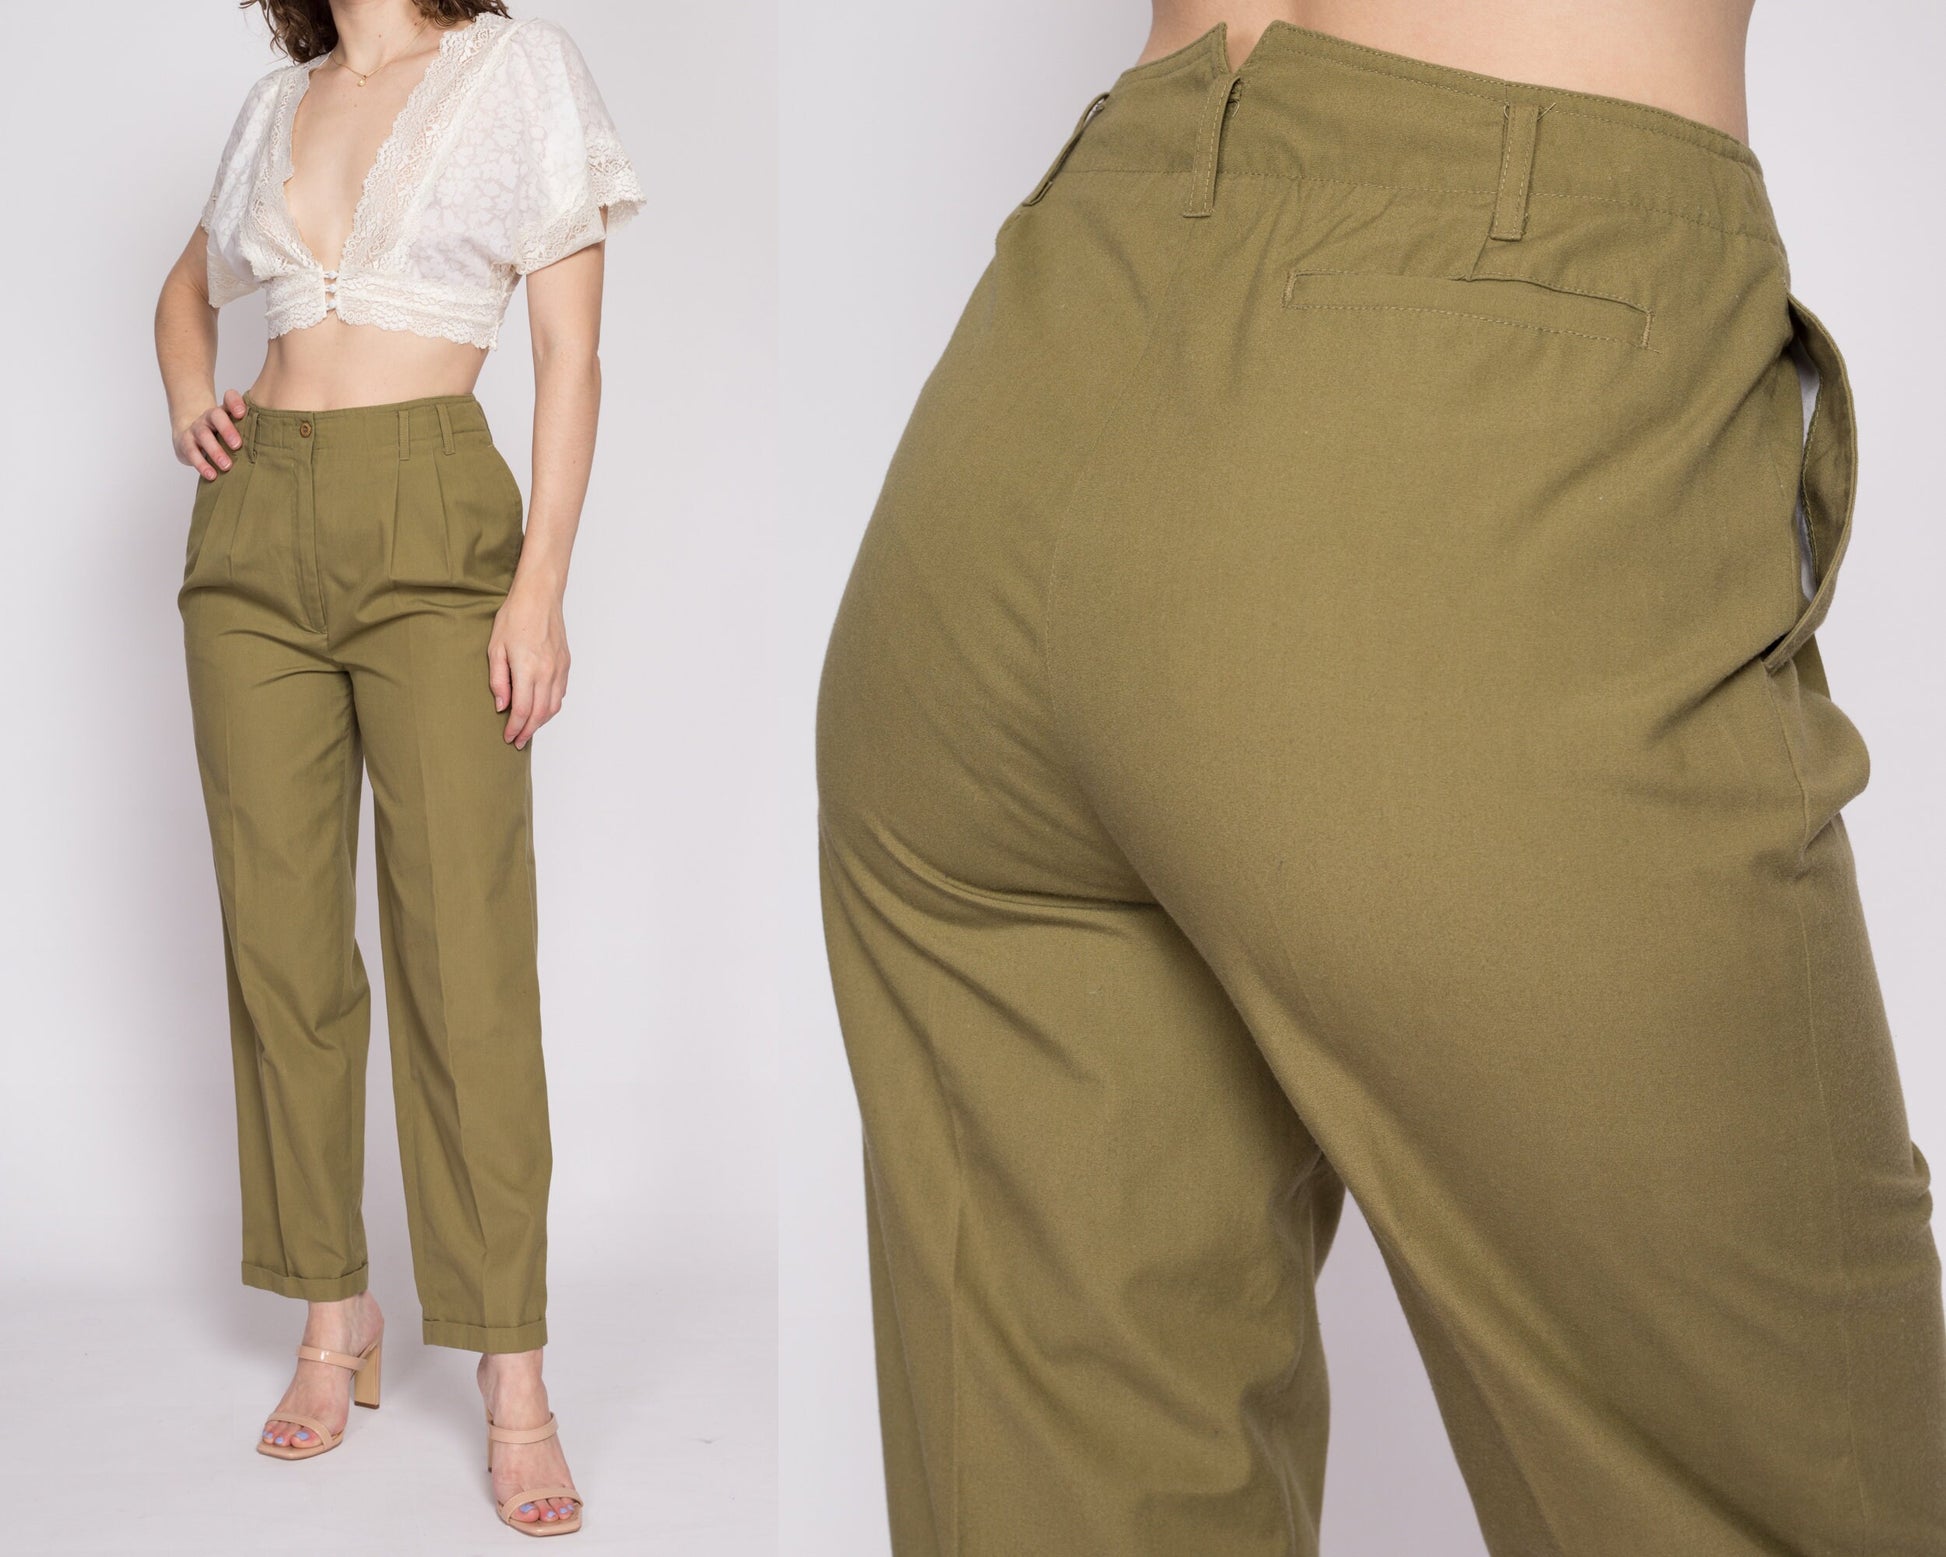 80s Olive High Waisted Trousers - Medium, 28